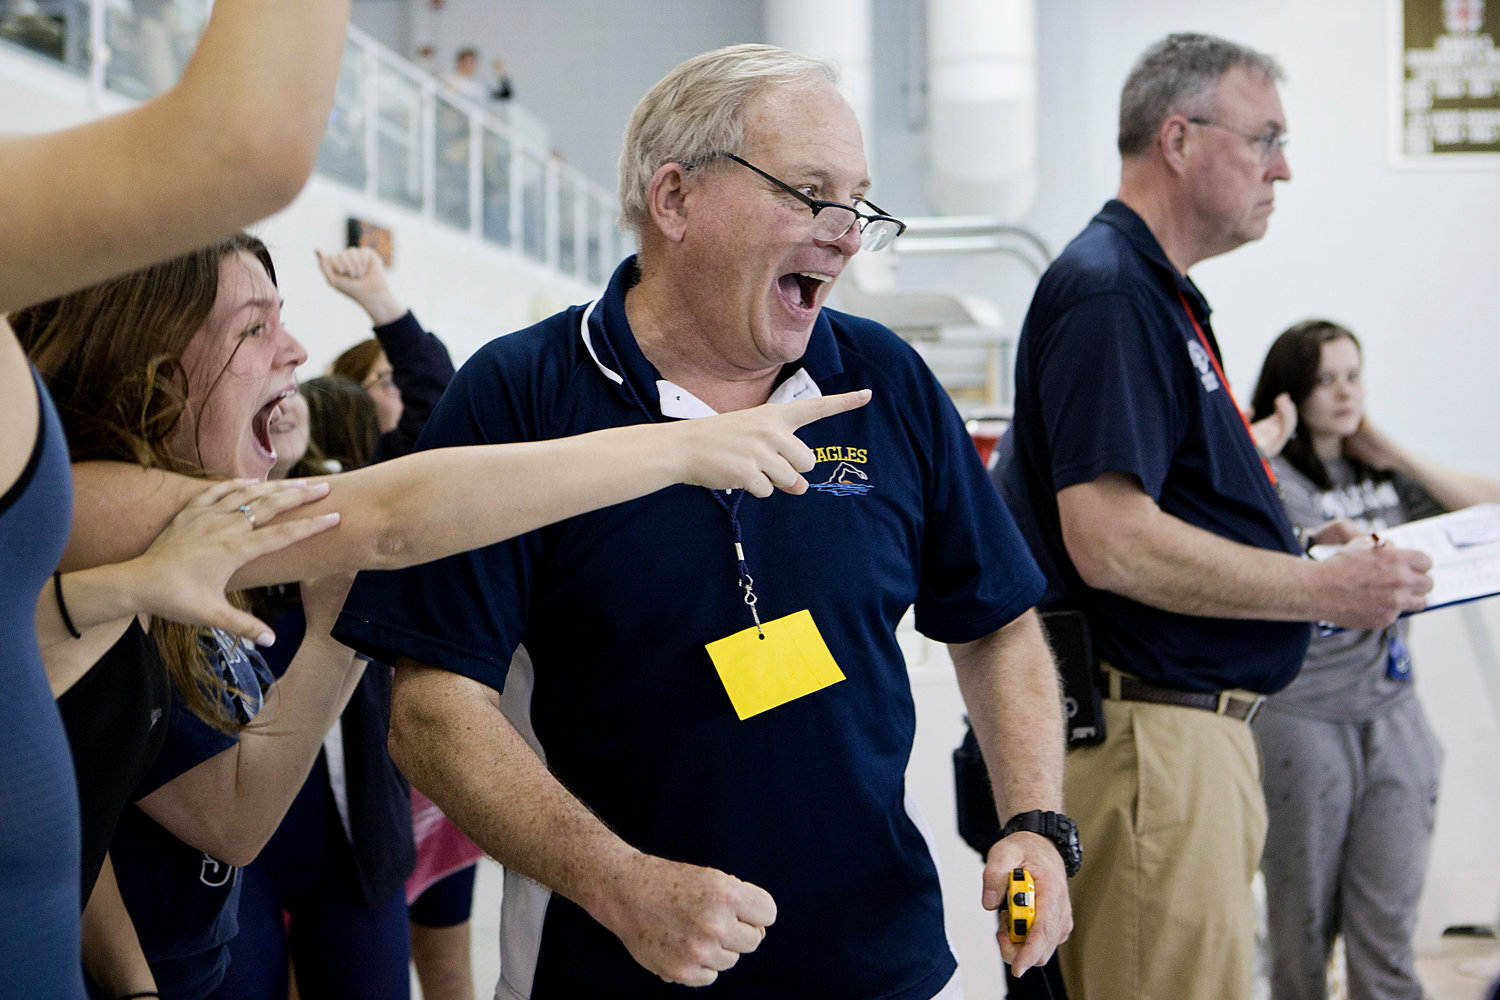 Barrington High School head coach Sandy Gorham reacts with his team as Sydni Diehl swims the final leg of the 400 free relay, securing the top spot at Saturday's State Championship meet.